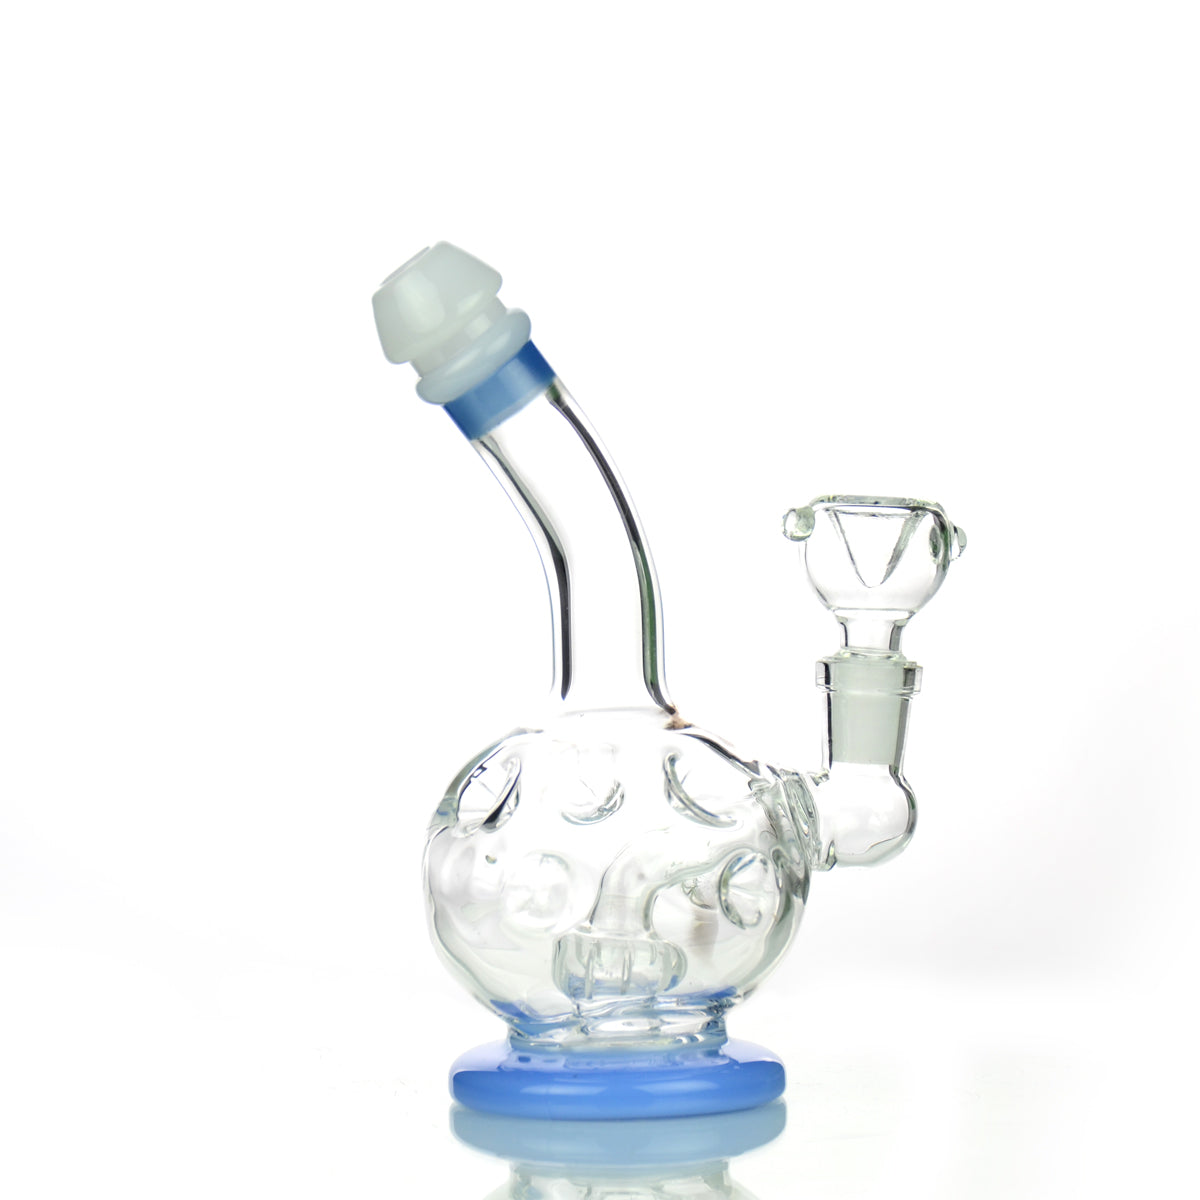 7" Ice Punch Art Slime Bong Glass with 14mm Male Bowl